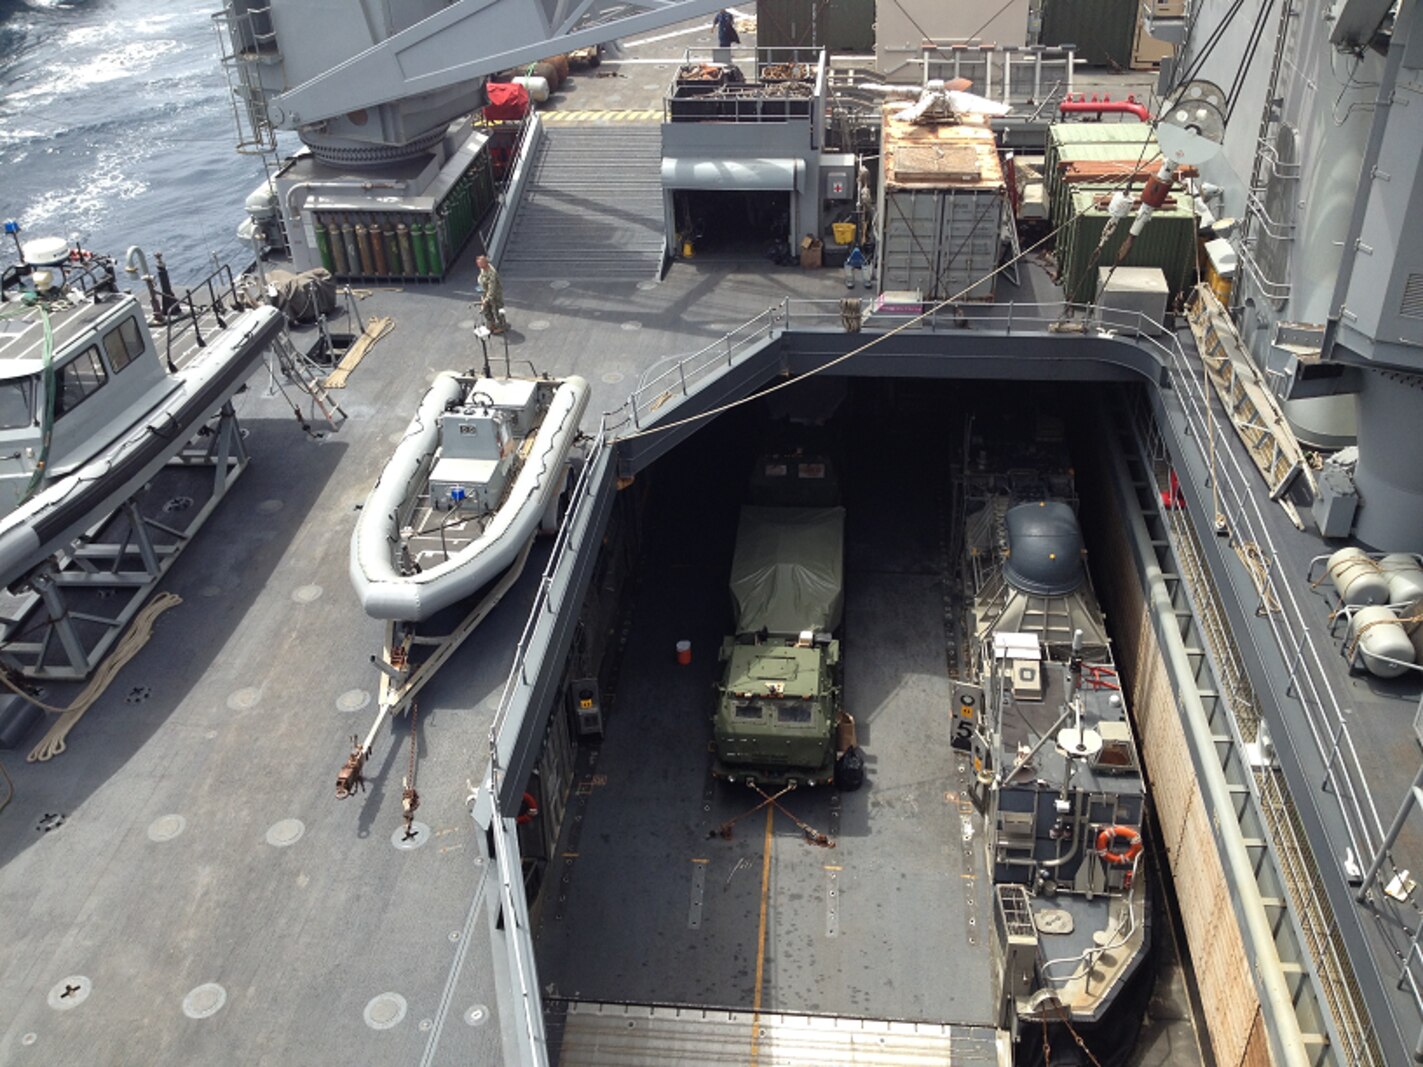 A M142 HIMARS launcher from Battery R can be seen chained to an LCAC in the well deck of the USS Rushmore (LSD-47) while underway.